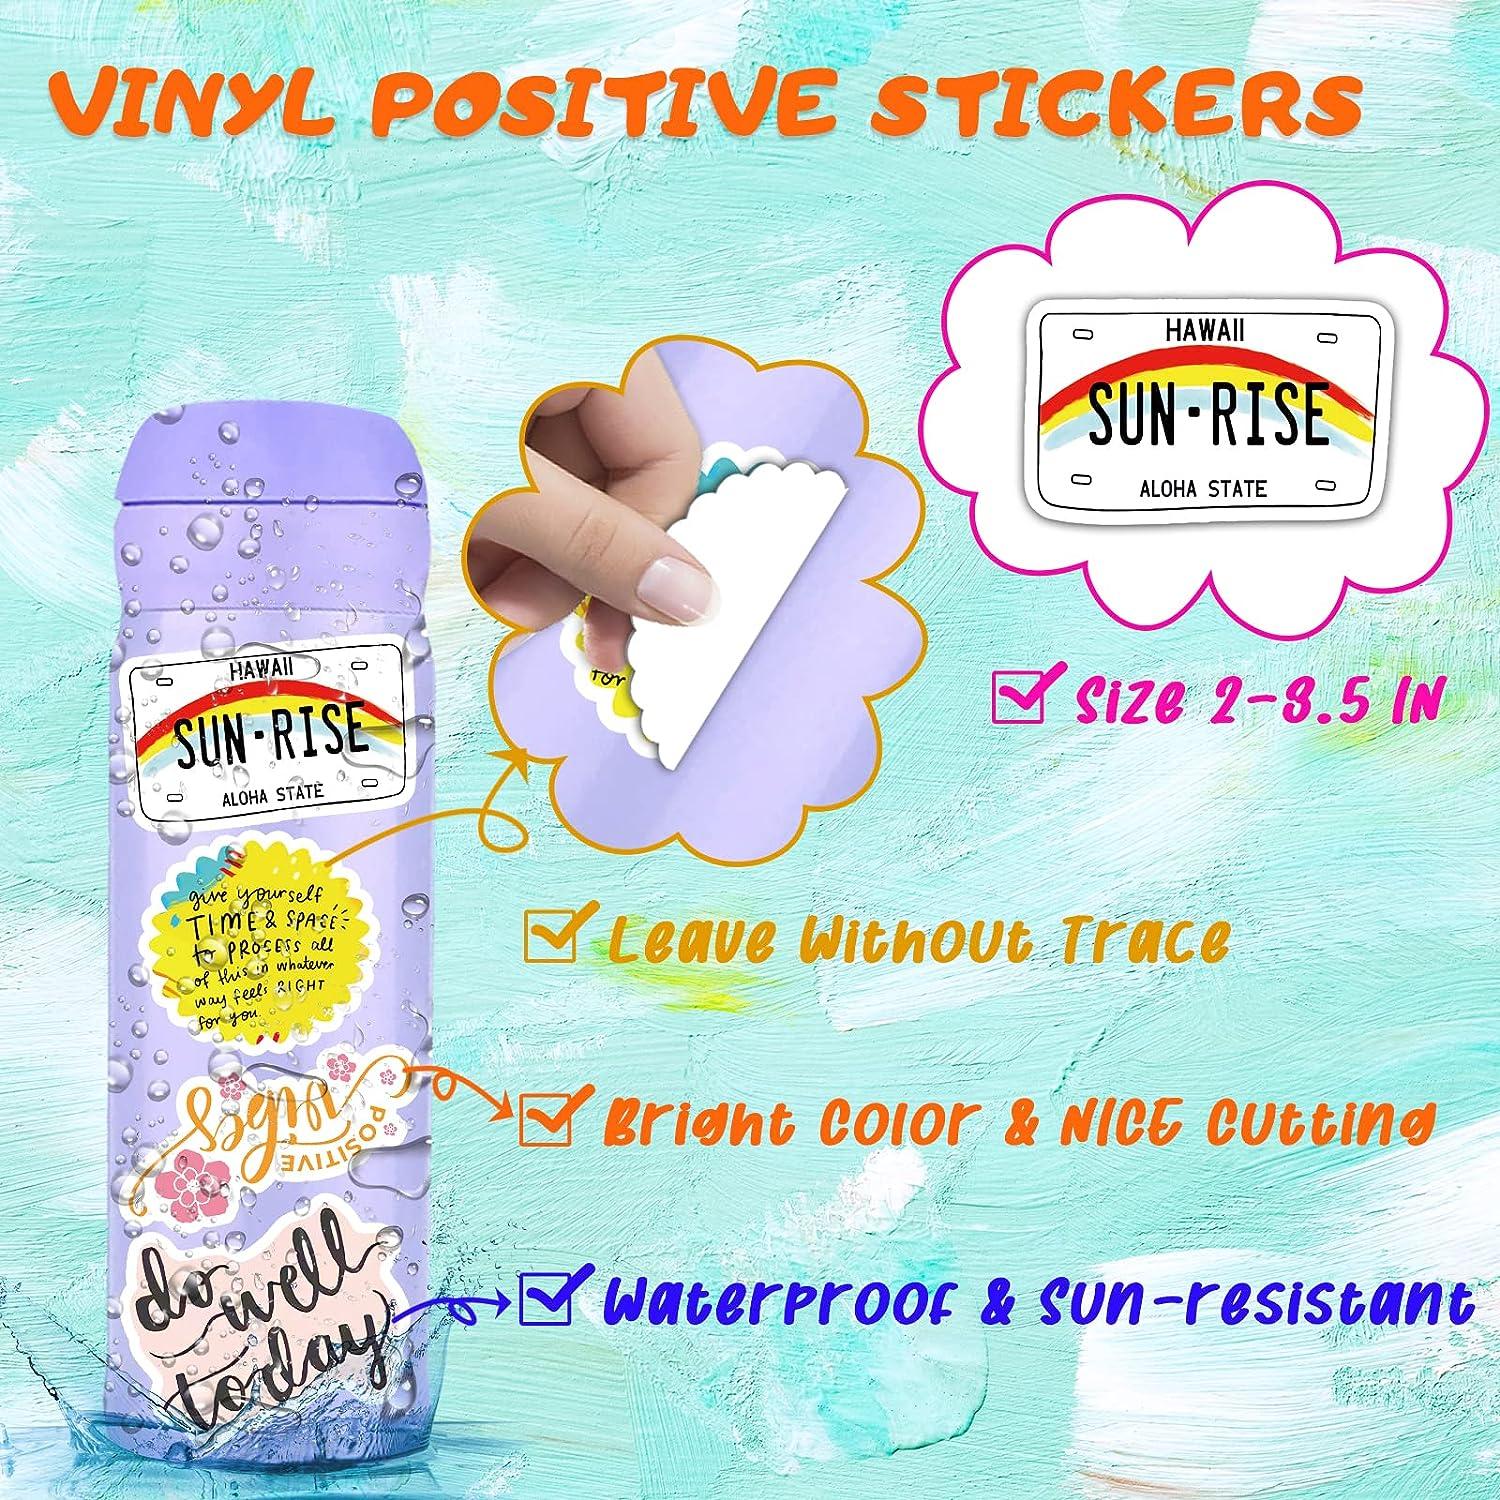 Water Bottle Stickers, Positive Stickers, Stickers Pack Of 7, Vinyl  Stickers, Motivational Stickers, Stickers For Water Bottles,Laptop Decal